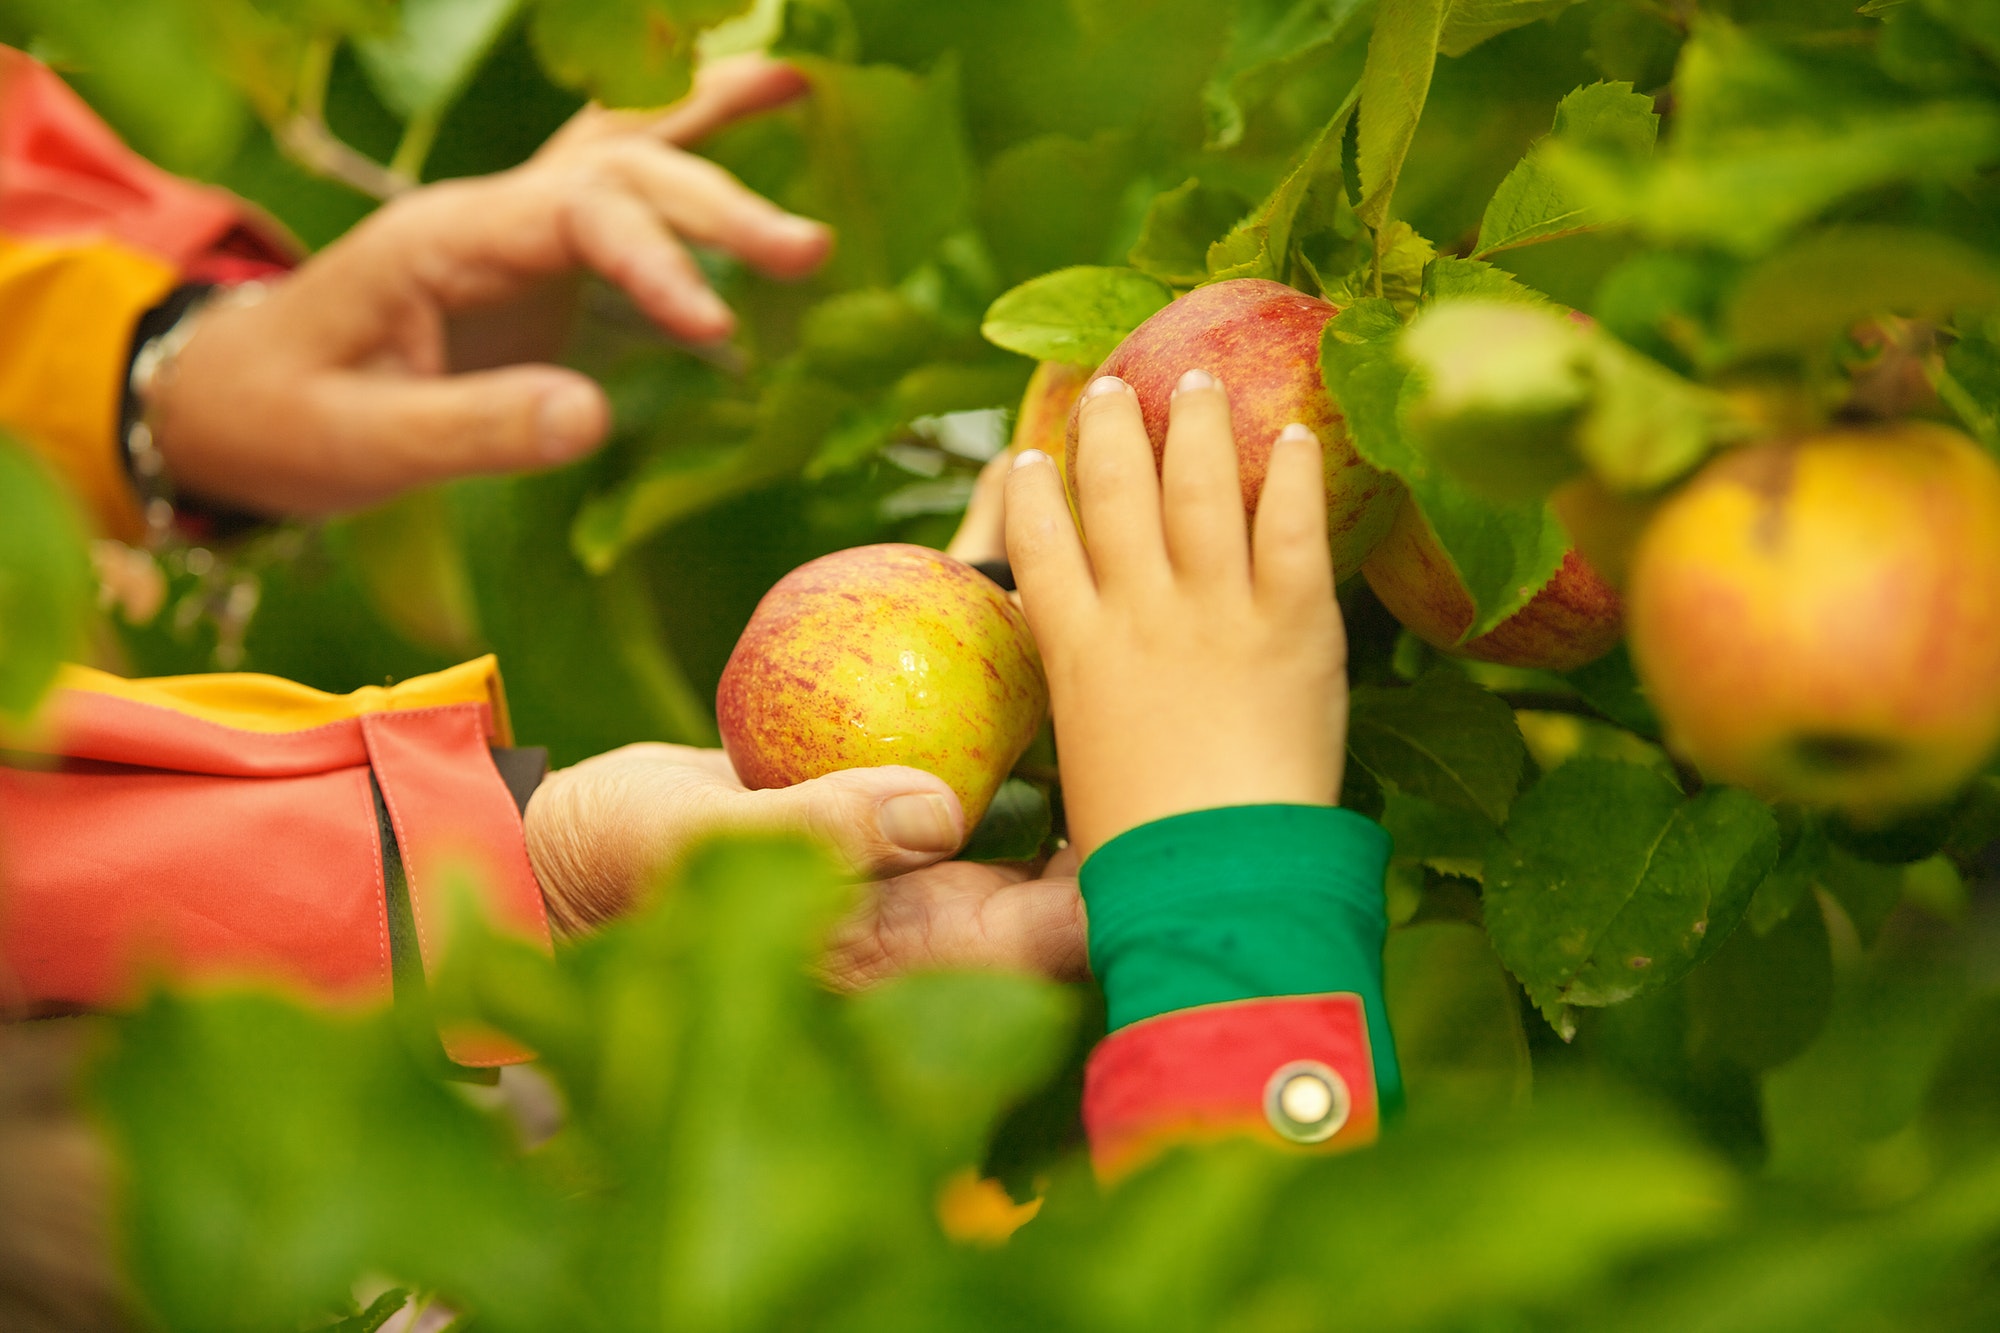 Hands Picking Apples from Tree